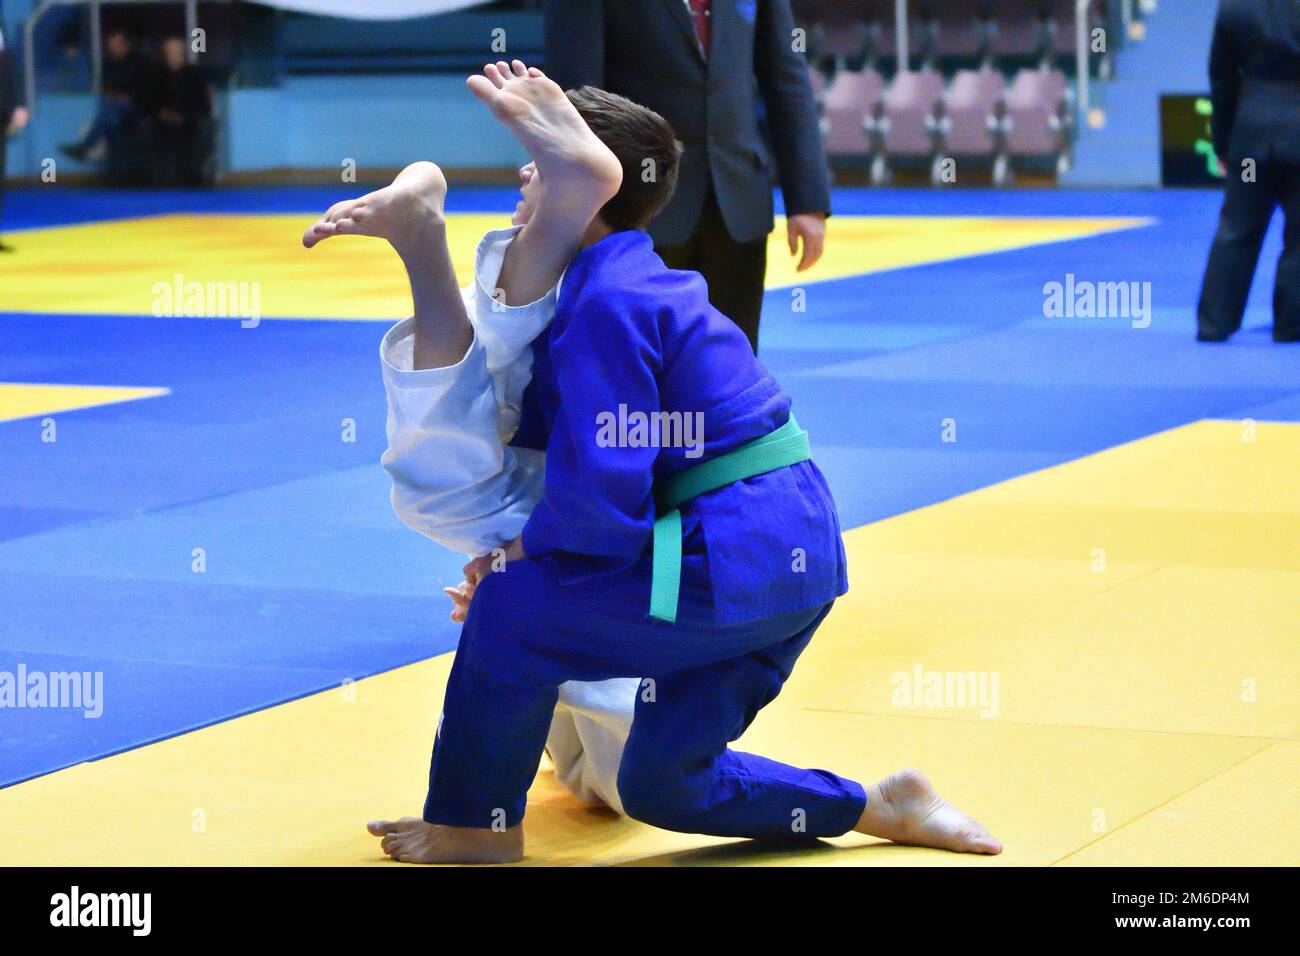 Orenburg, Russia - October 21, 2017: Boys compete in Judo at the all-Russian Judo tournament among b Stock Photo